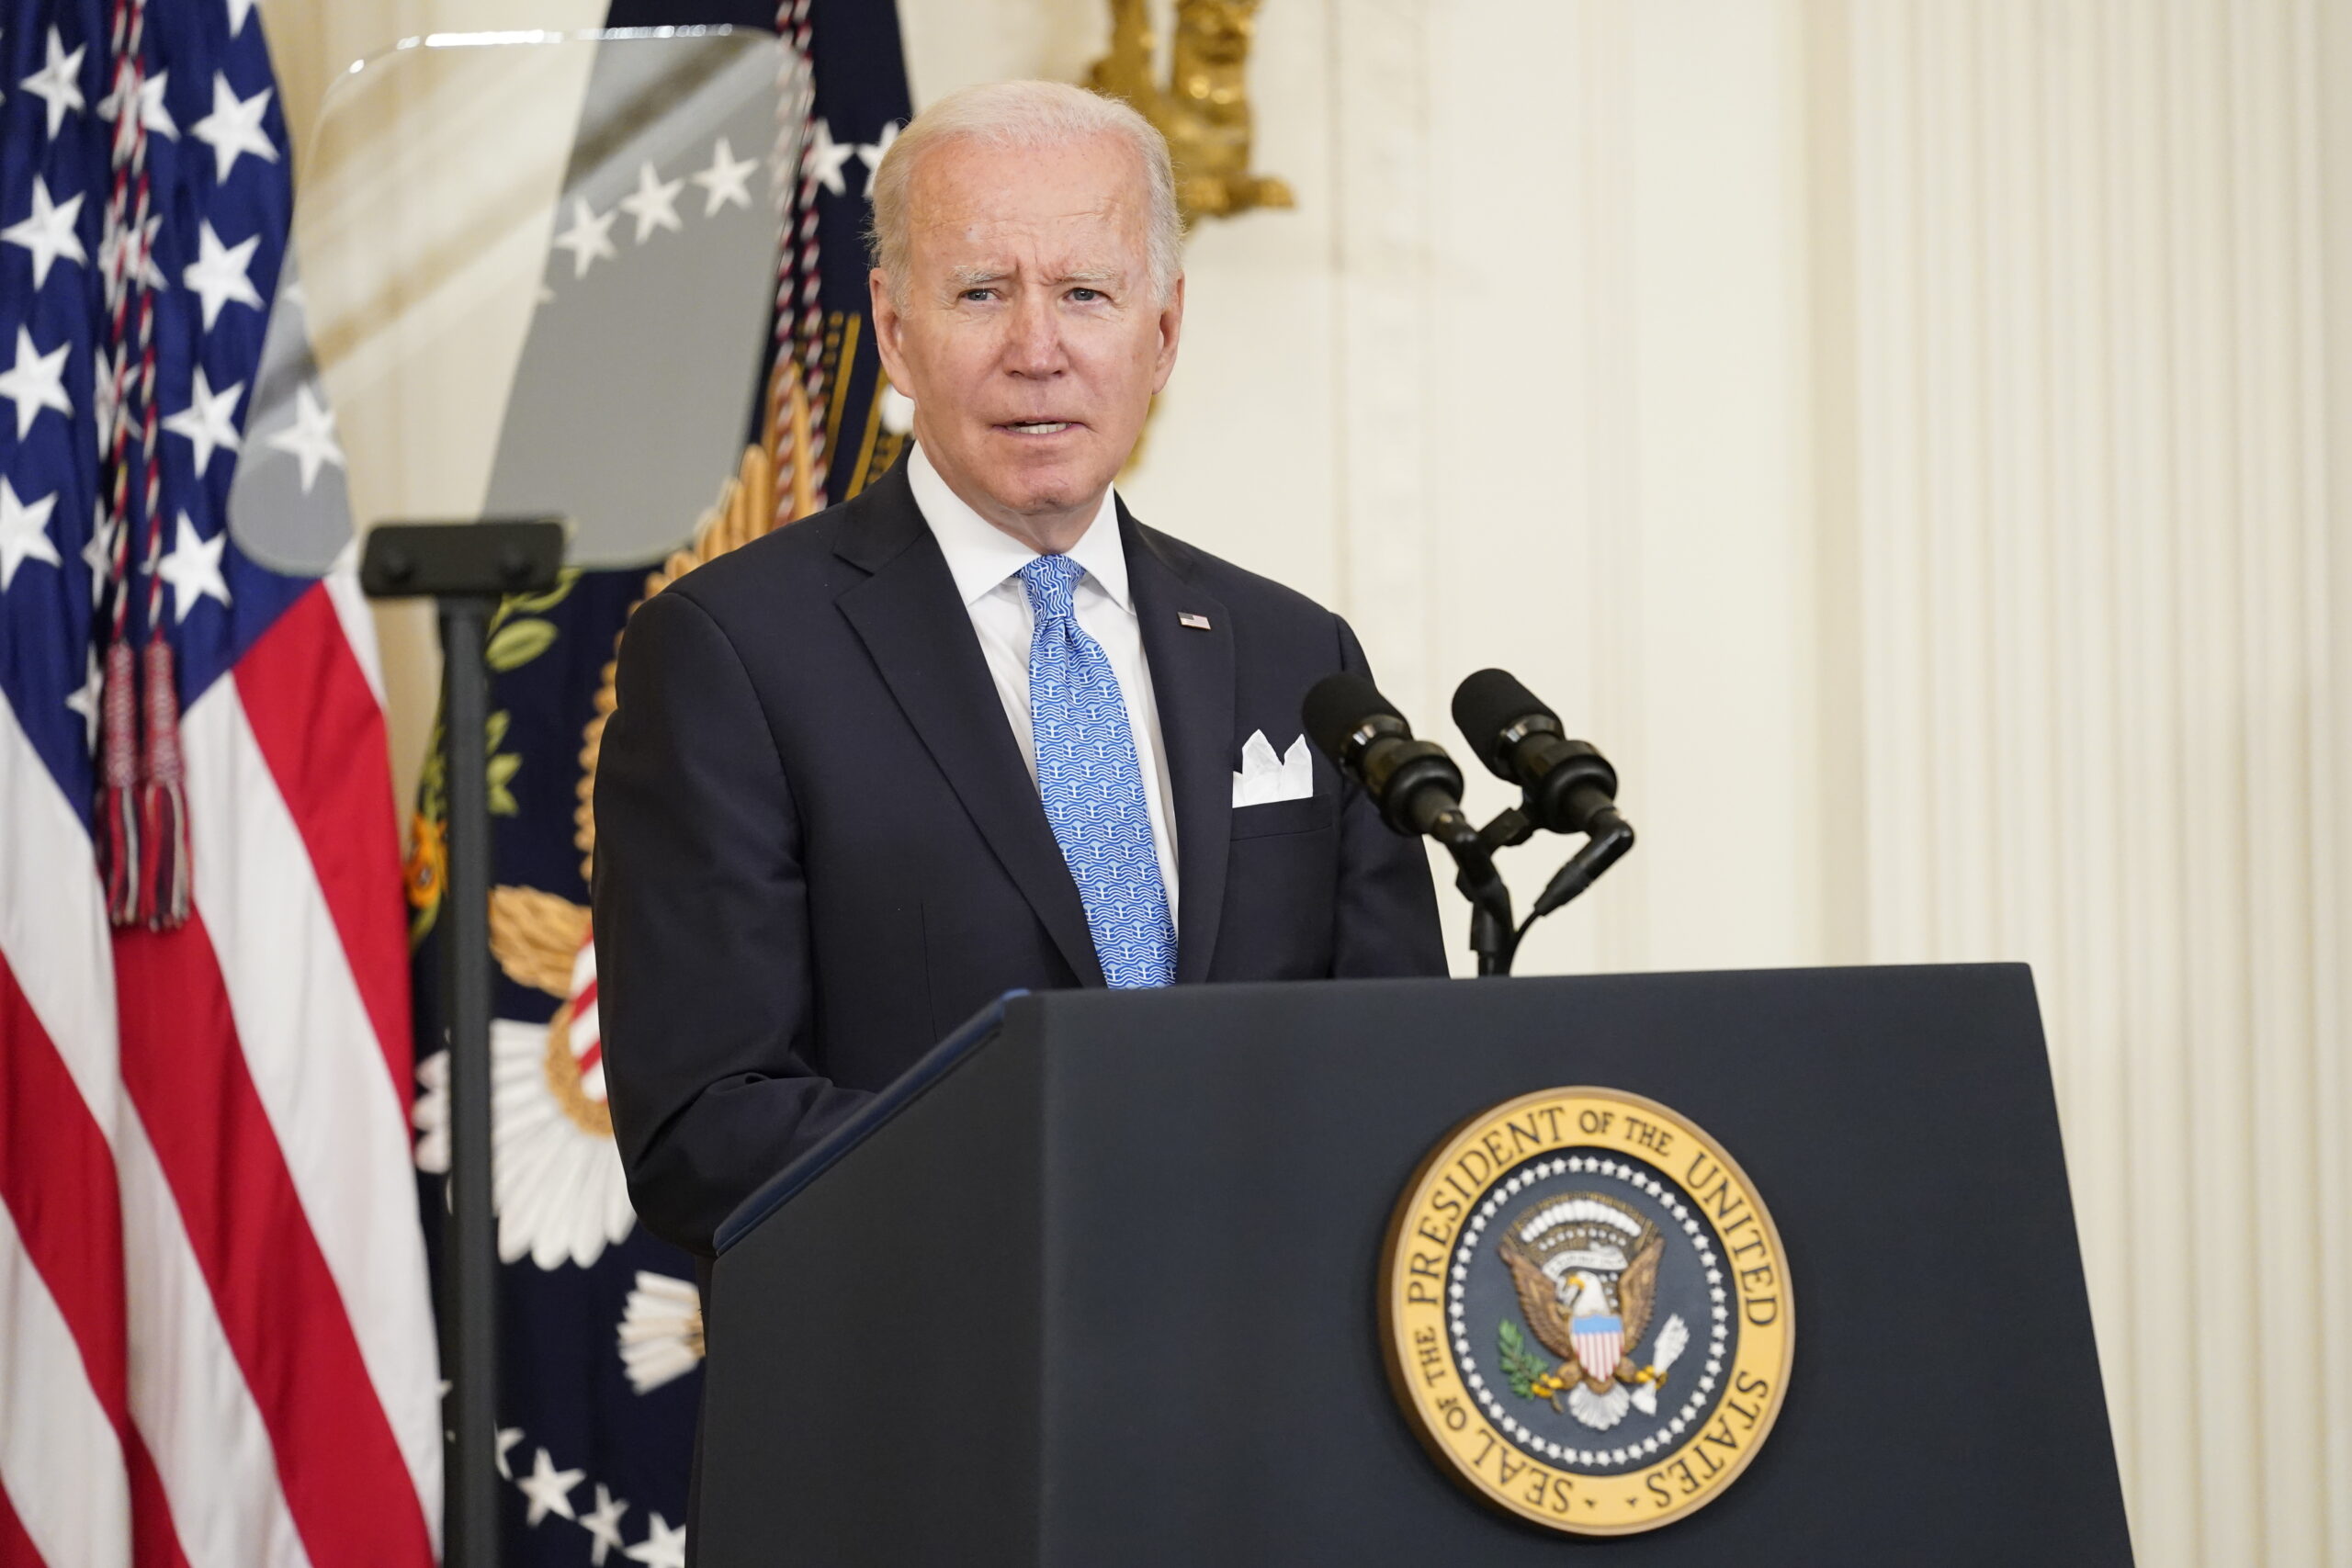 President Joe Biden speaks before presenting Public Safety Officer Medal of Valor awards to fourteen recipients, during an event in the East Room of the White House, Monday, May 16, 2022. (AP Photo/Andrew Harnik)